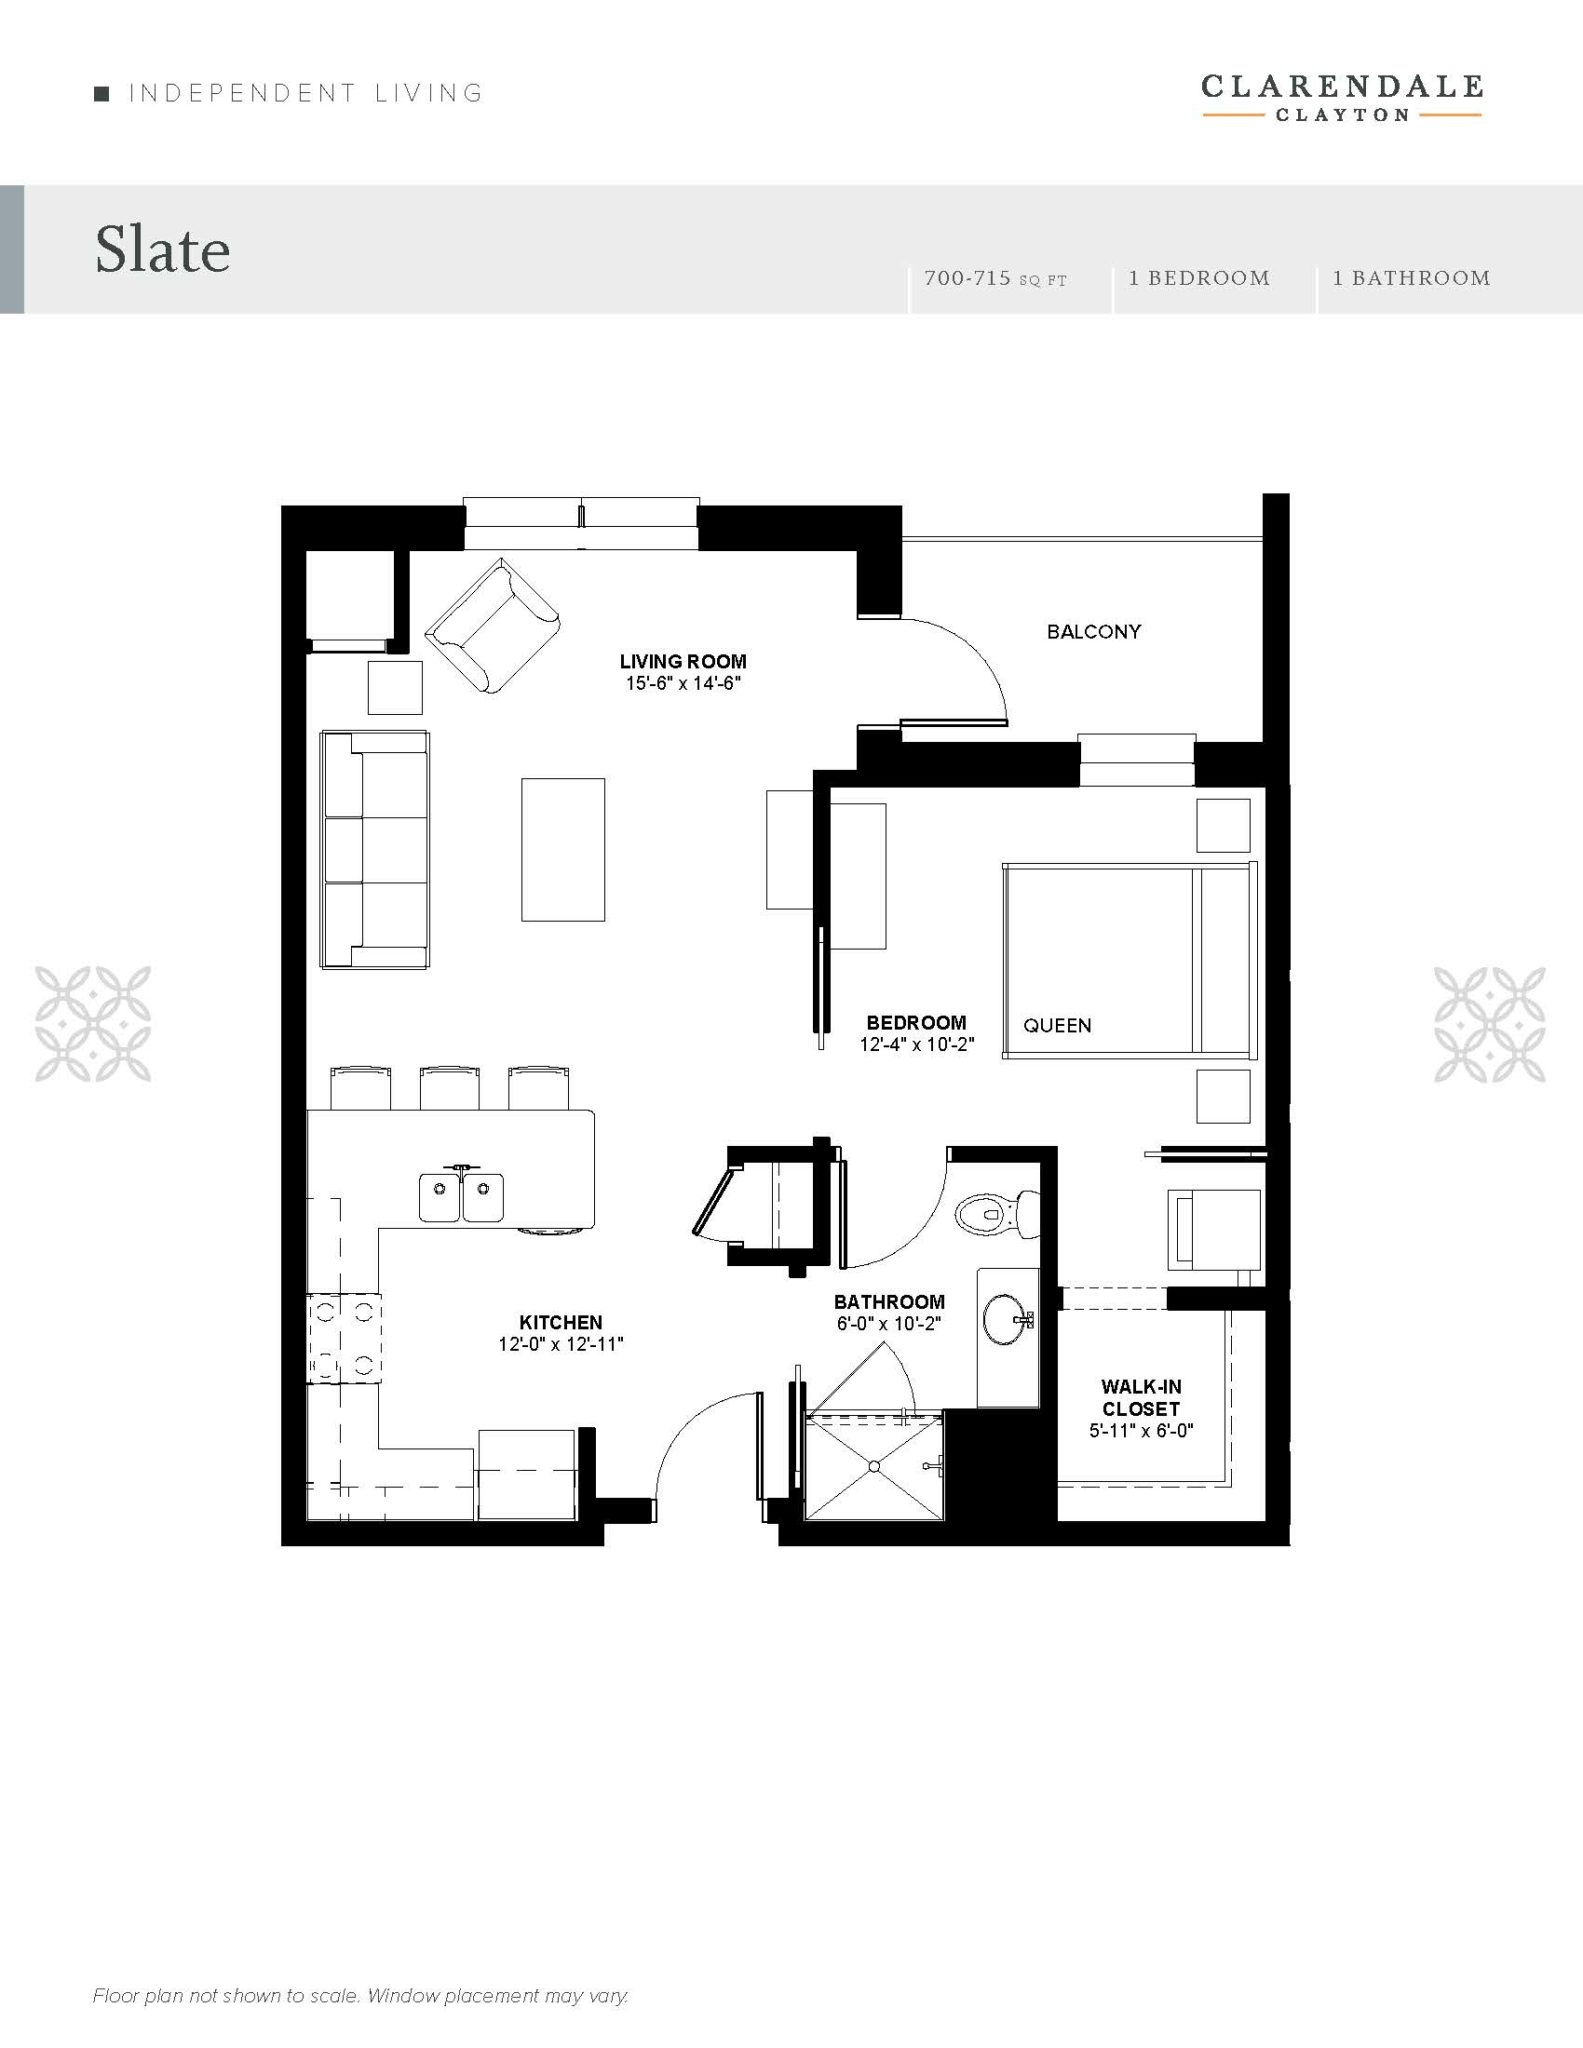 Senior Living Floor Plans And Pricing Information Clarendale Clayton